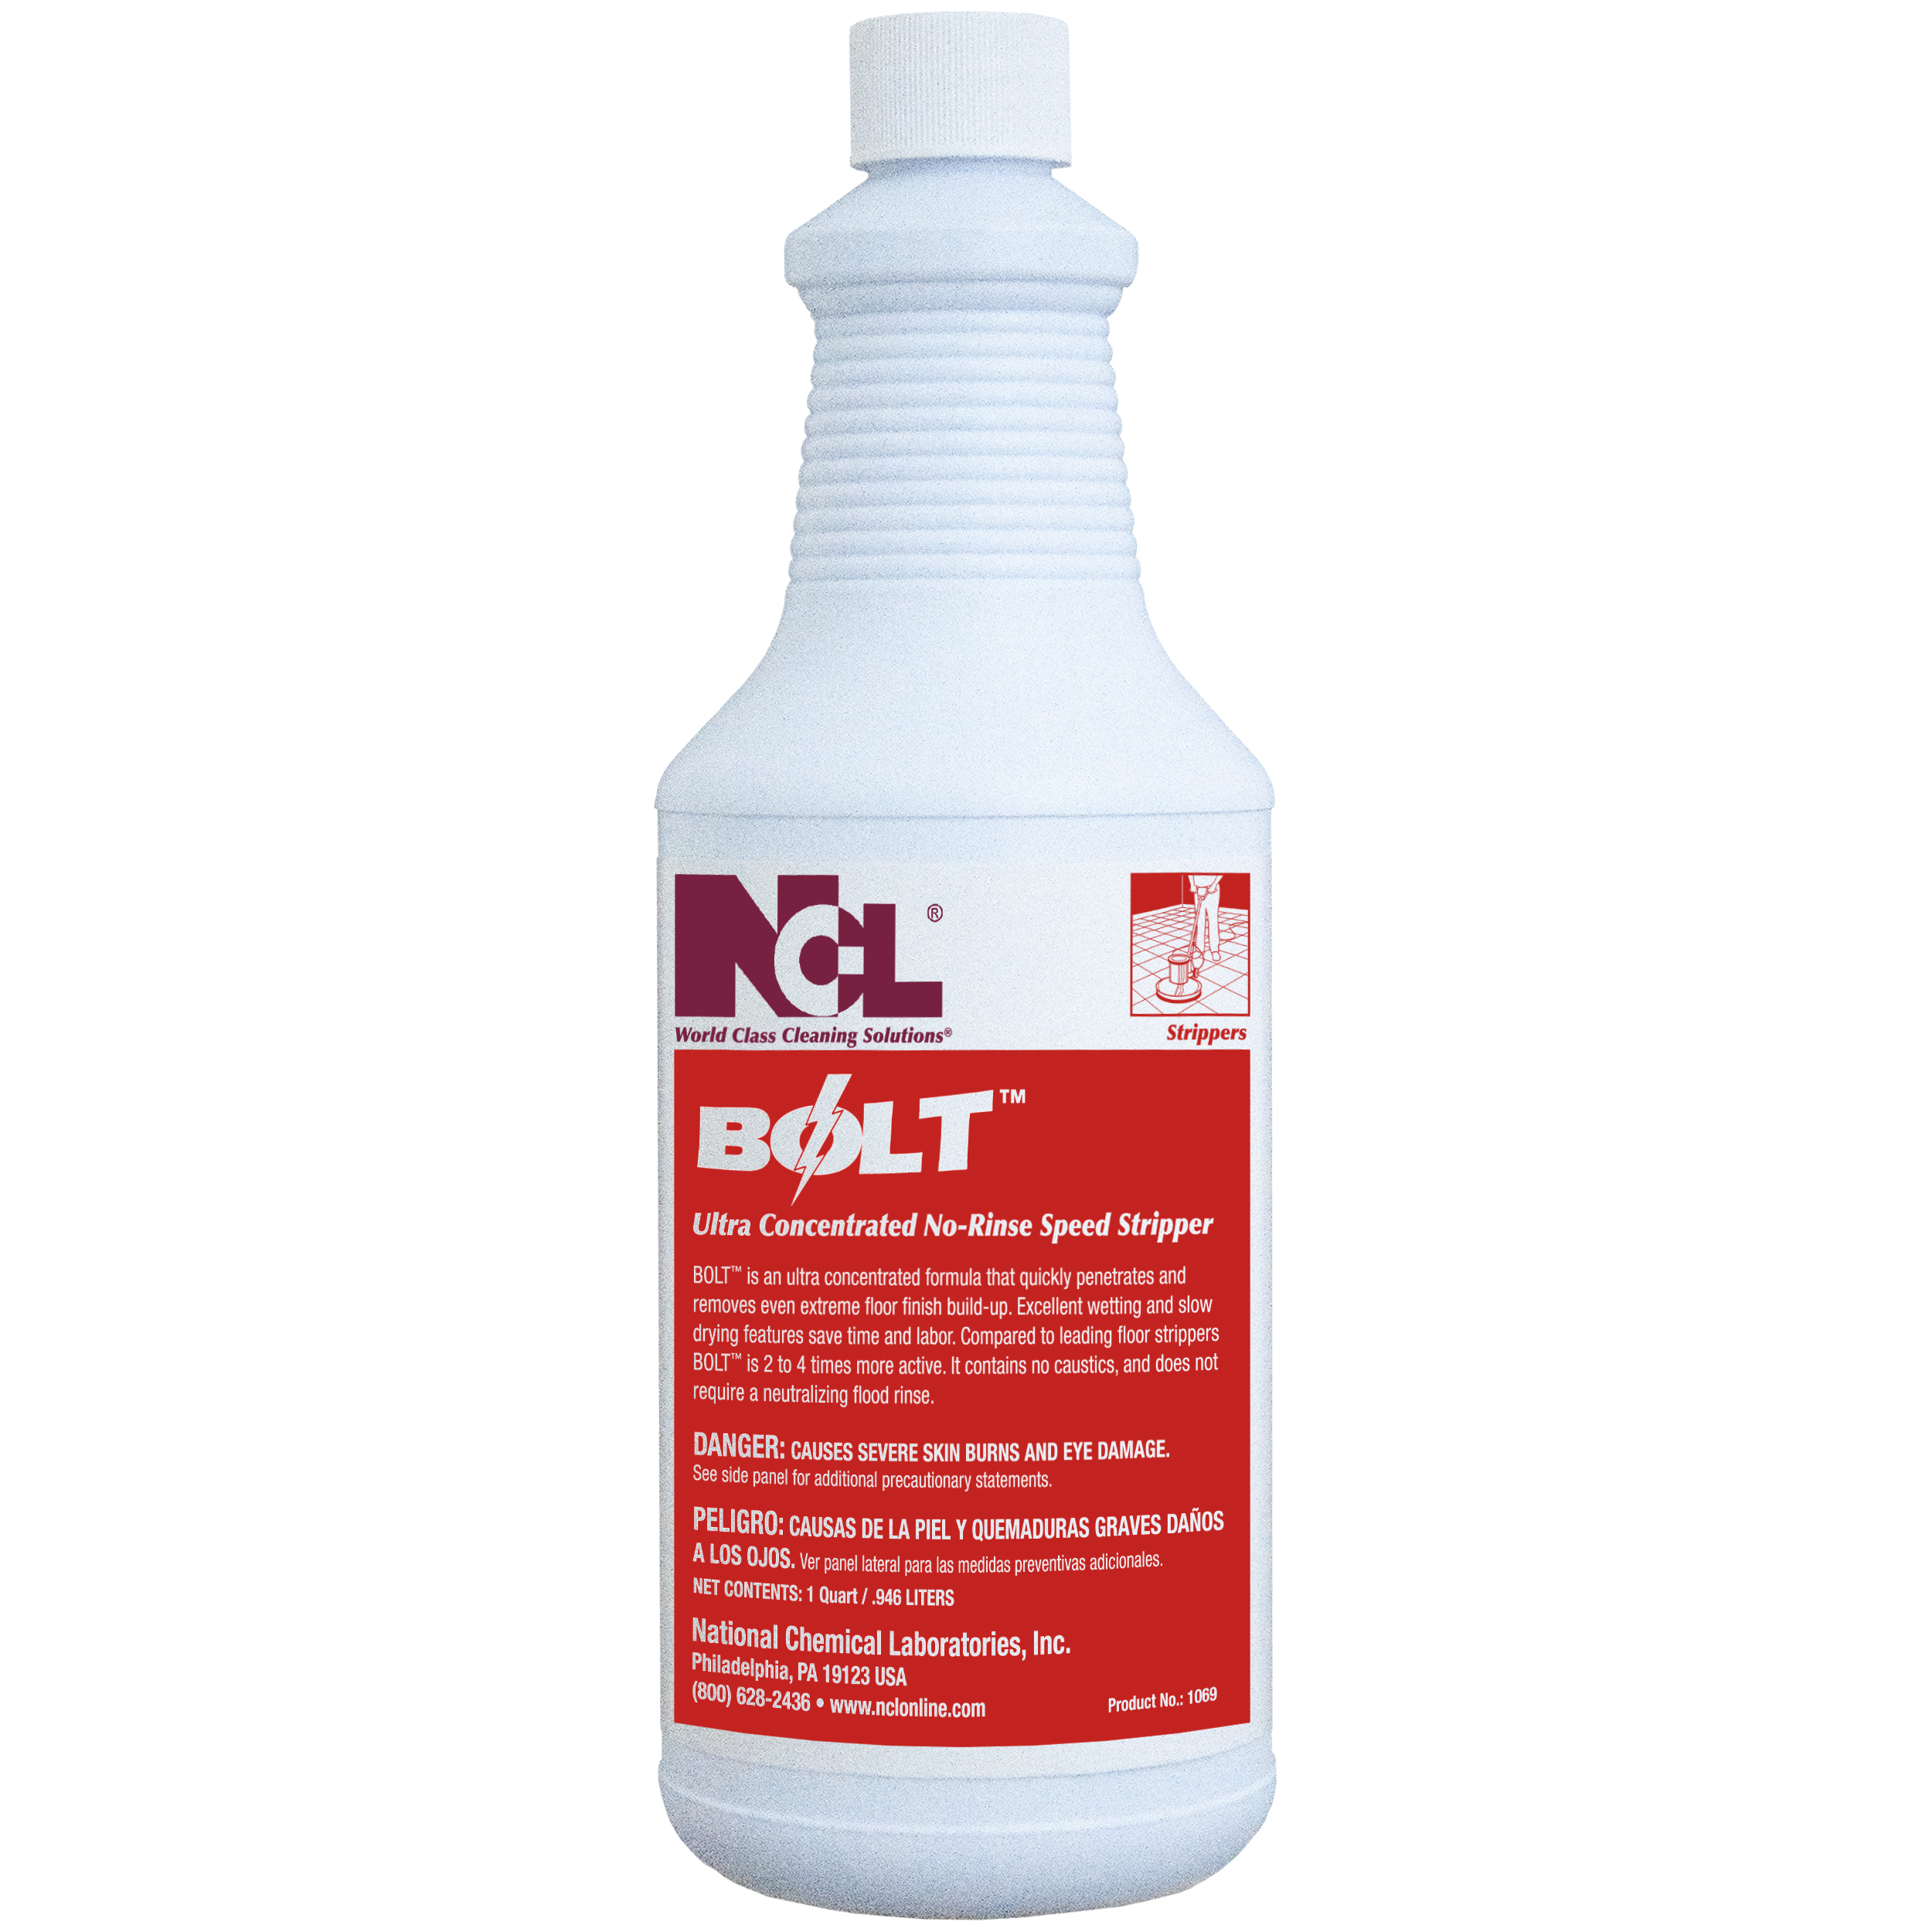  BOLT Ultra Concentrated No-Rinse Speed Stripper 12/32 oz (1 Qt.) Case (NCL1069-42) 